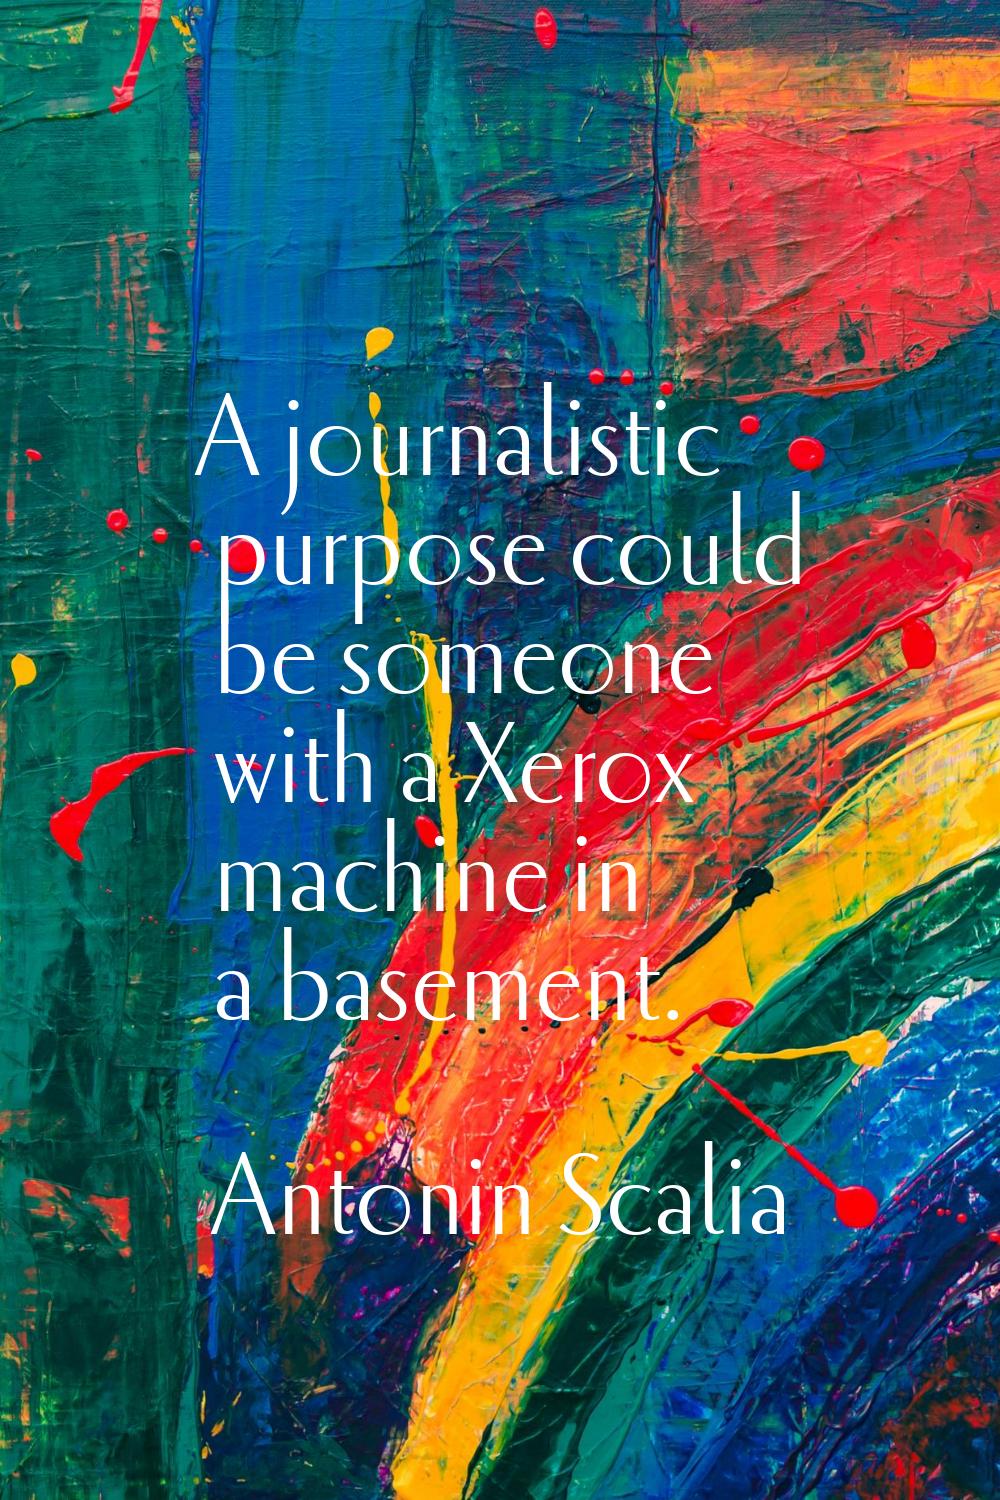 A journalistic purpose could be someone with a Xerox machine in a basement.